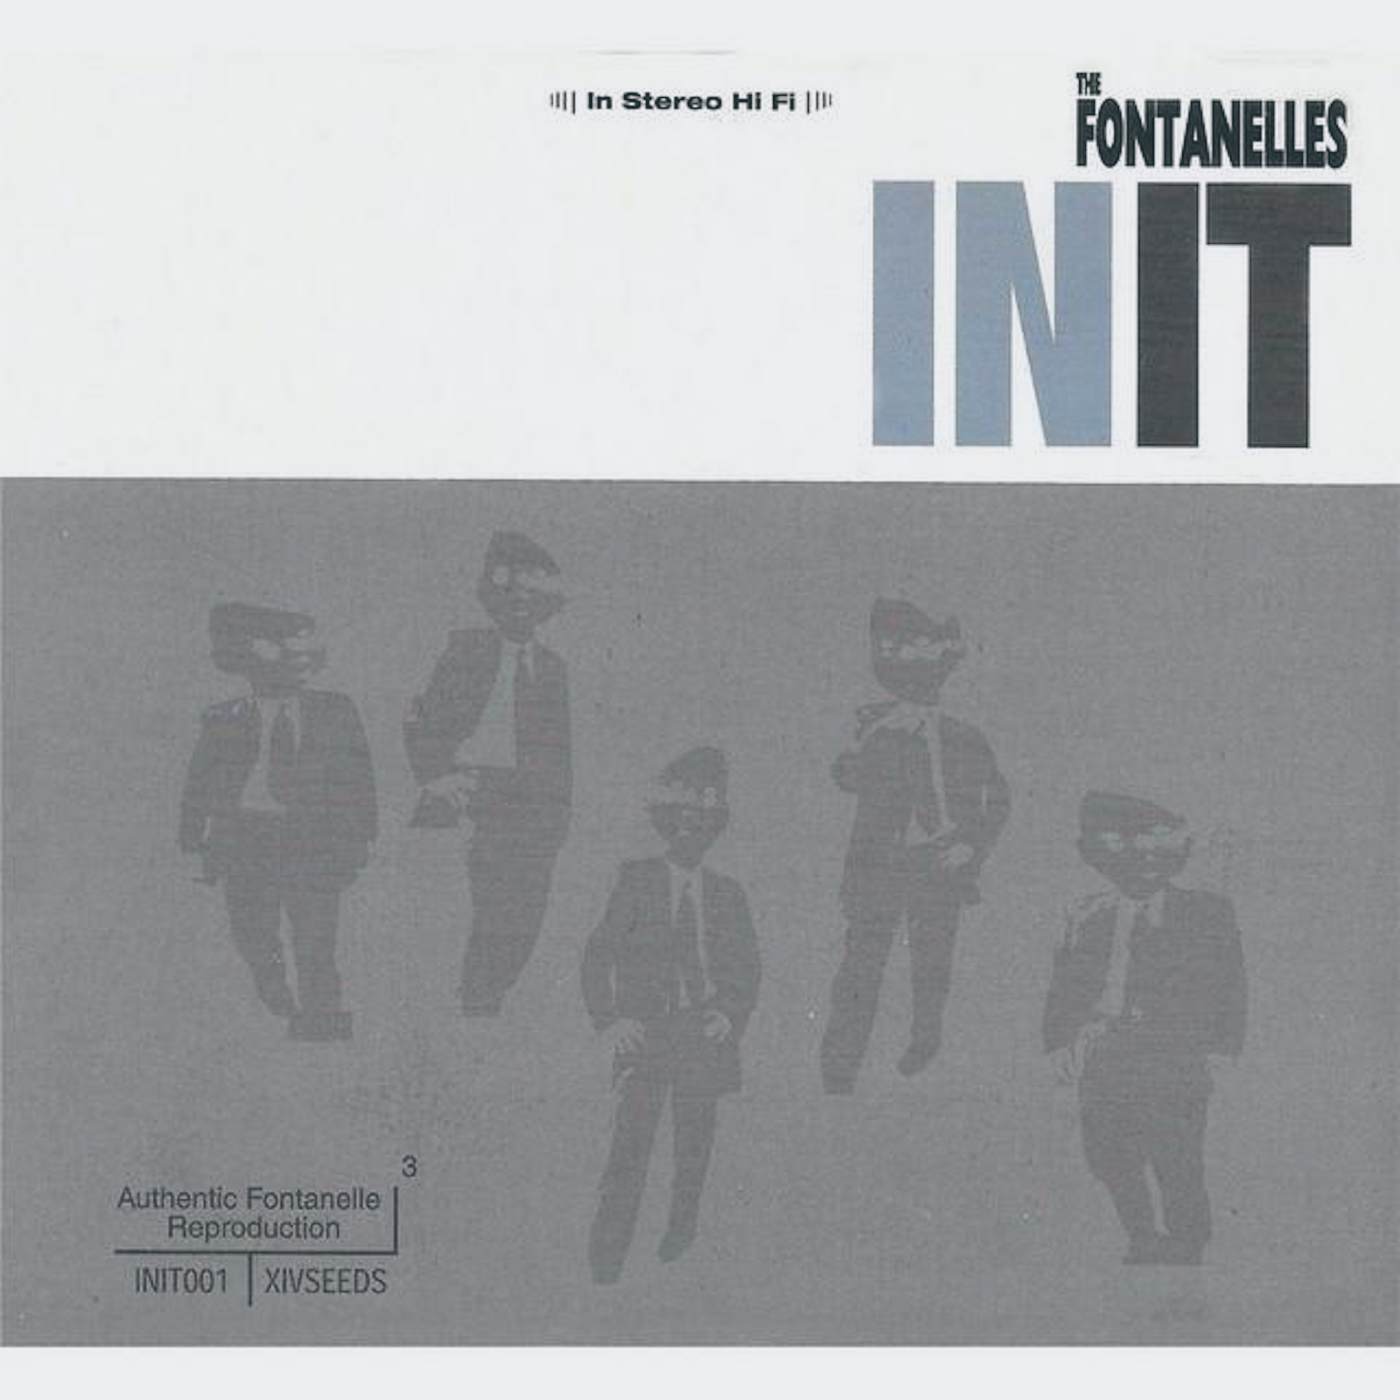 The Fontanelles